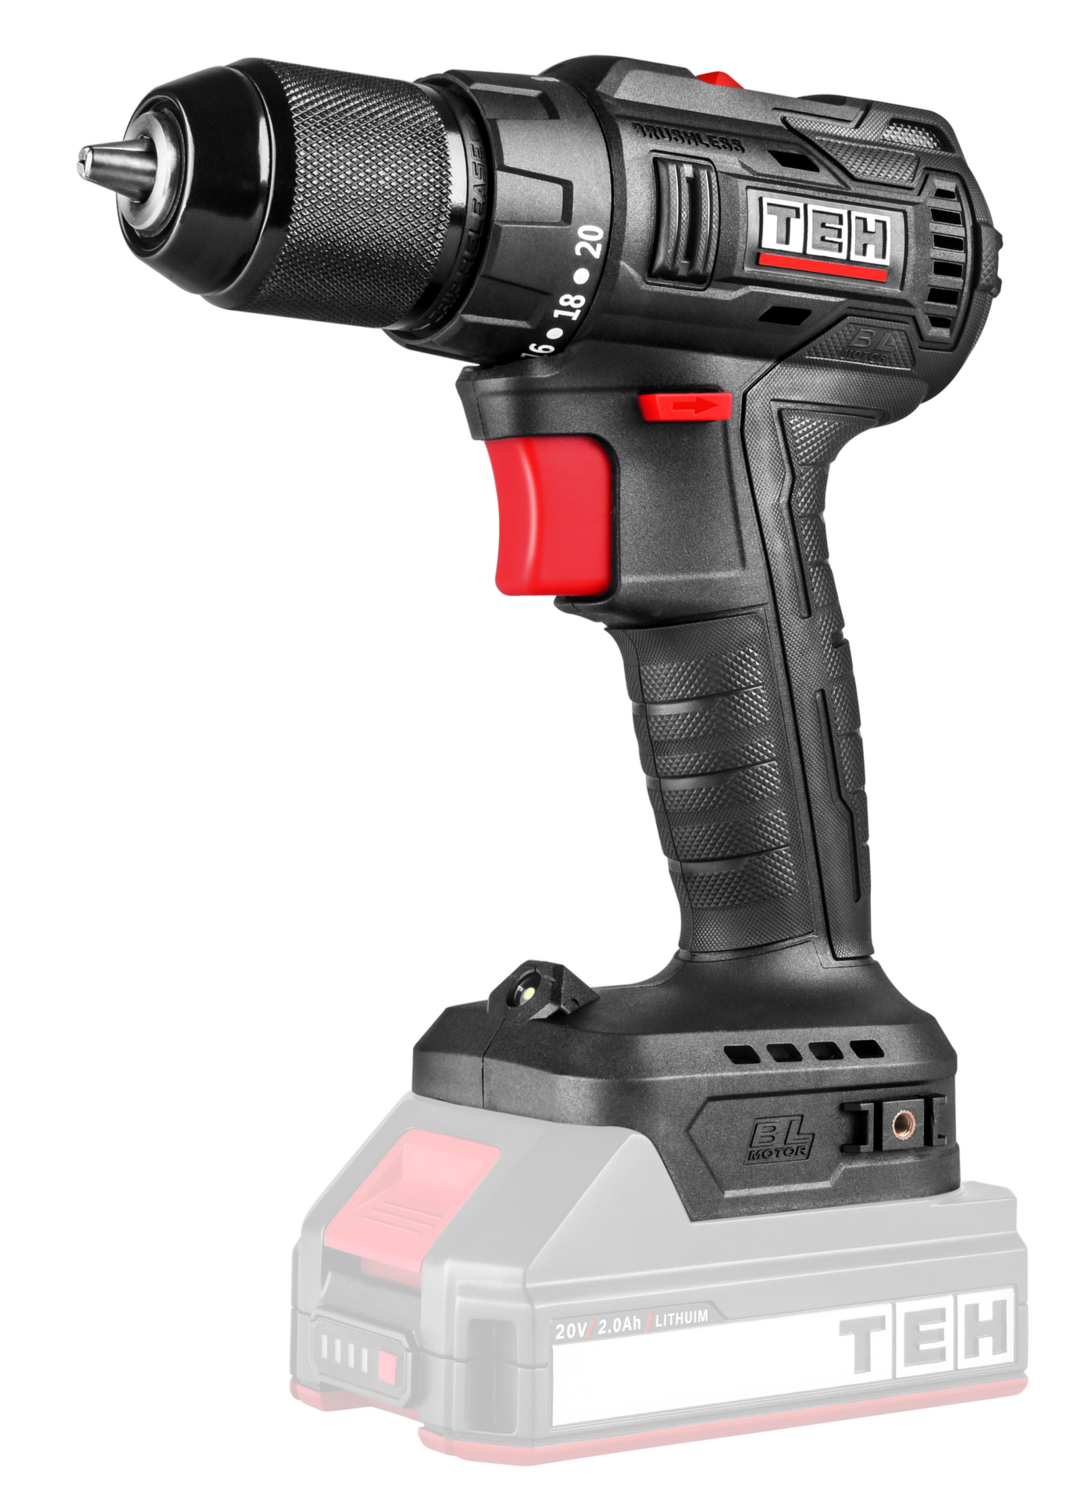 Brushless Cordless Impact Driver Drill 50Nm UNIT Only LD105